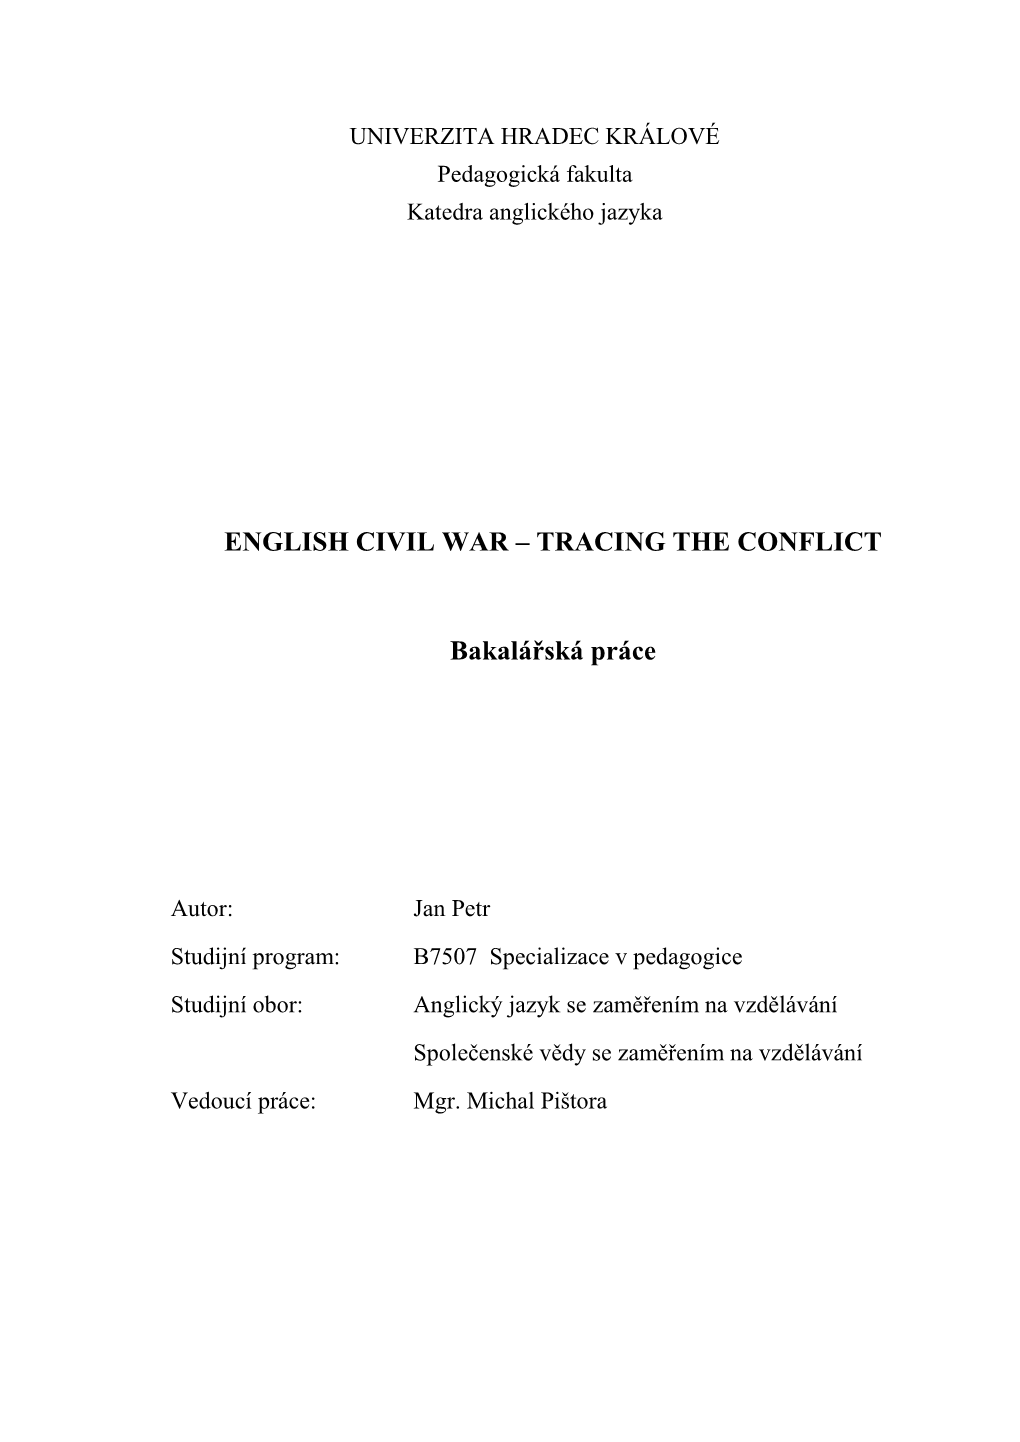 English Civil War – Tracing the Conflict